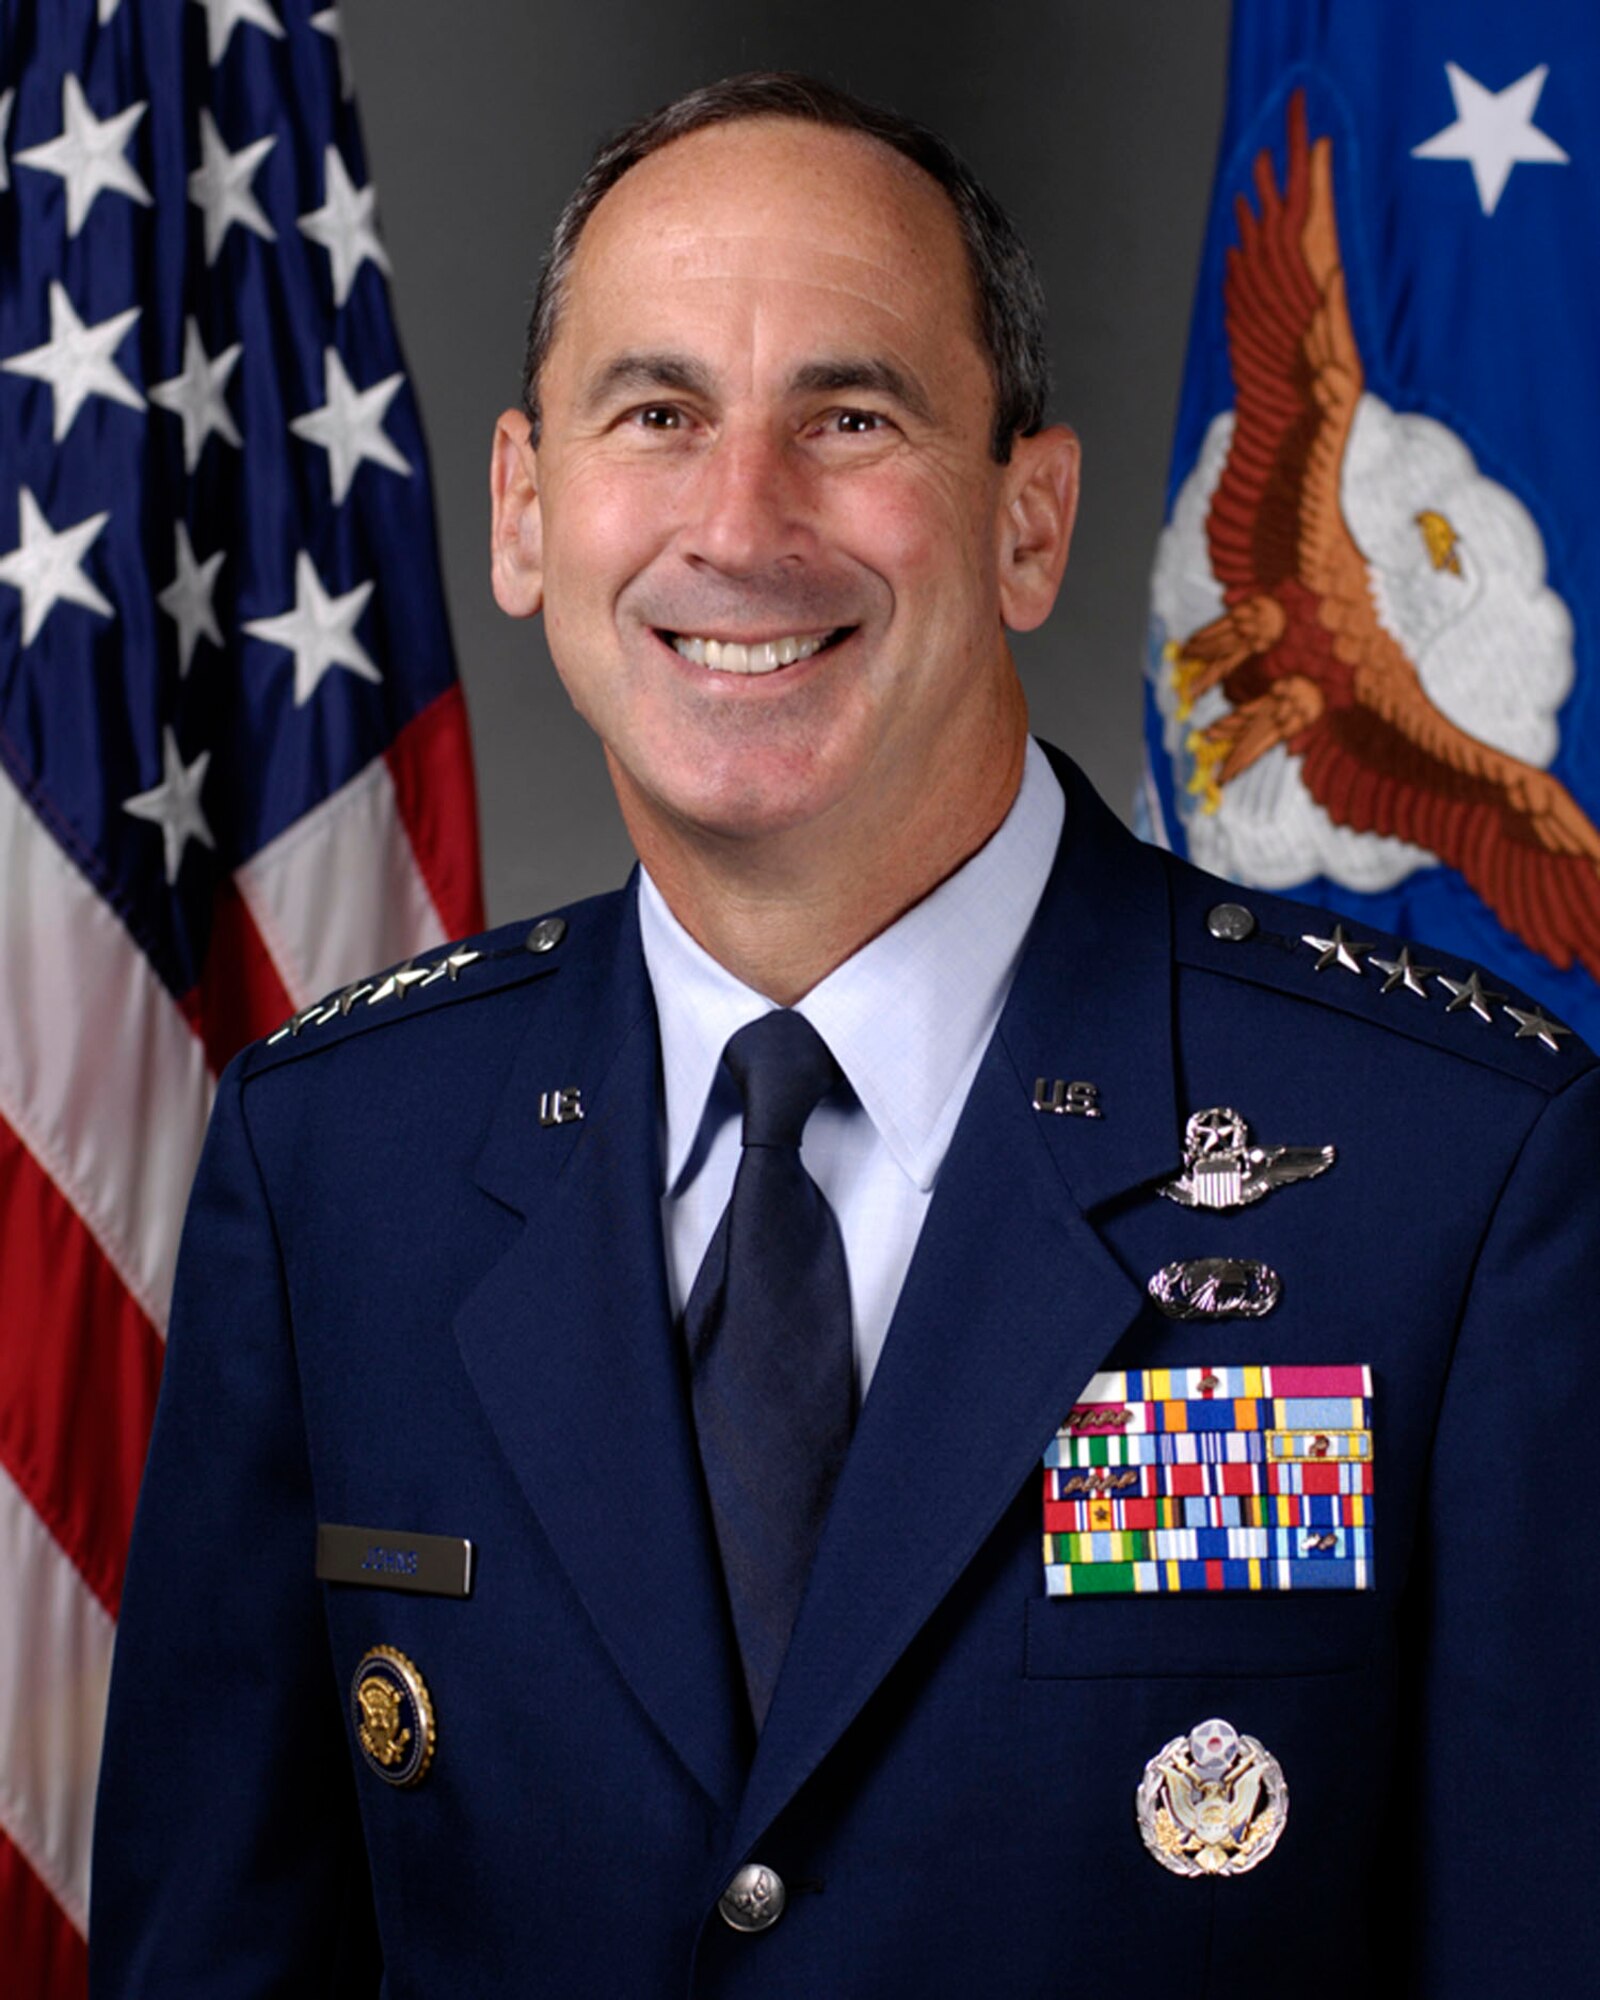 Gen. Raymond E. Johns Jr. is Commander, Air Mobility Command at Scott Air Force Base, Ill. (U.S. Air Force Photo)